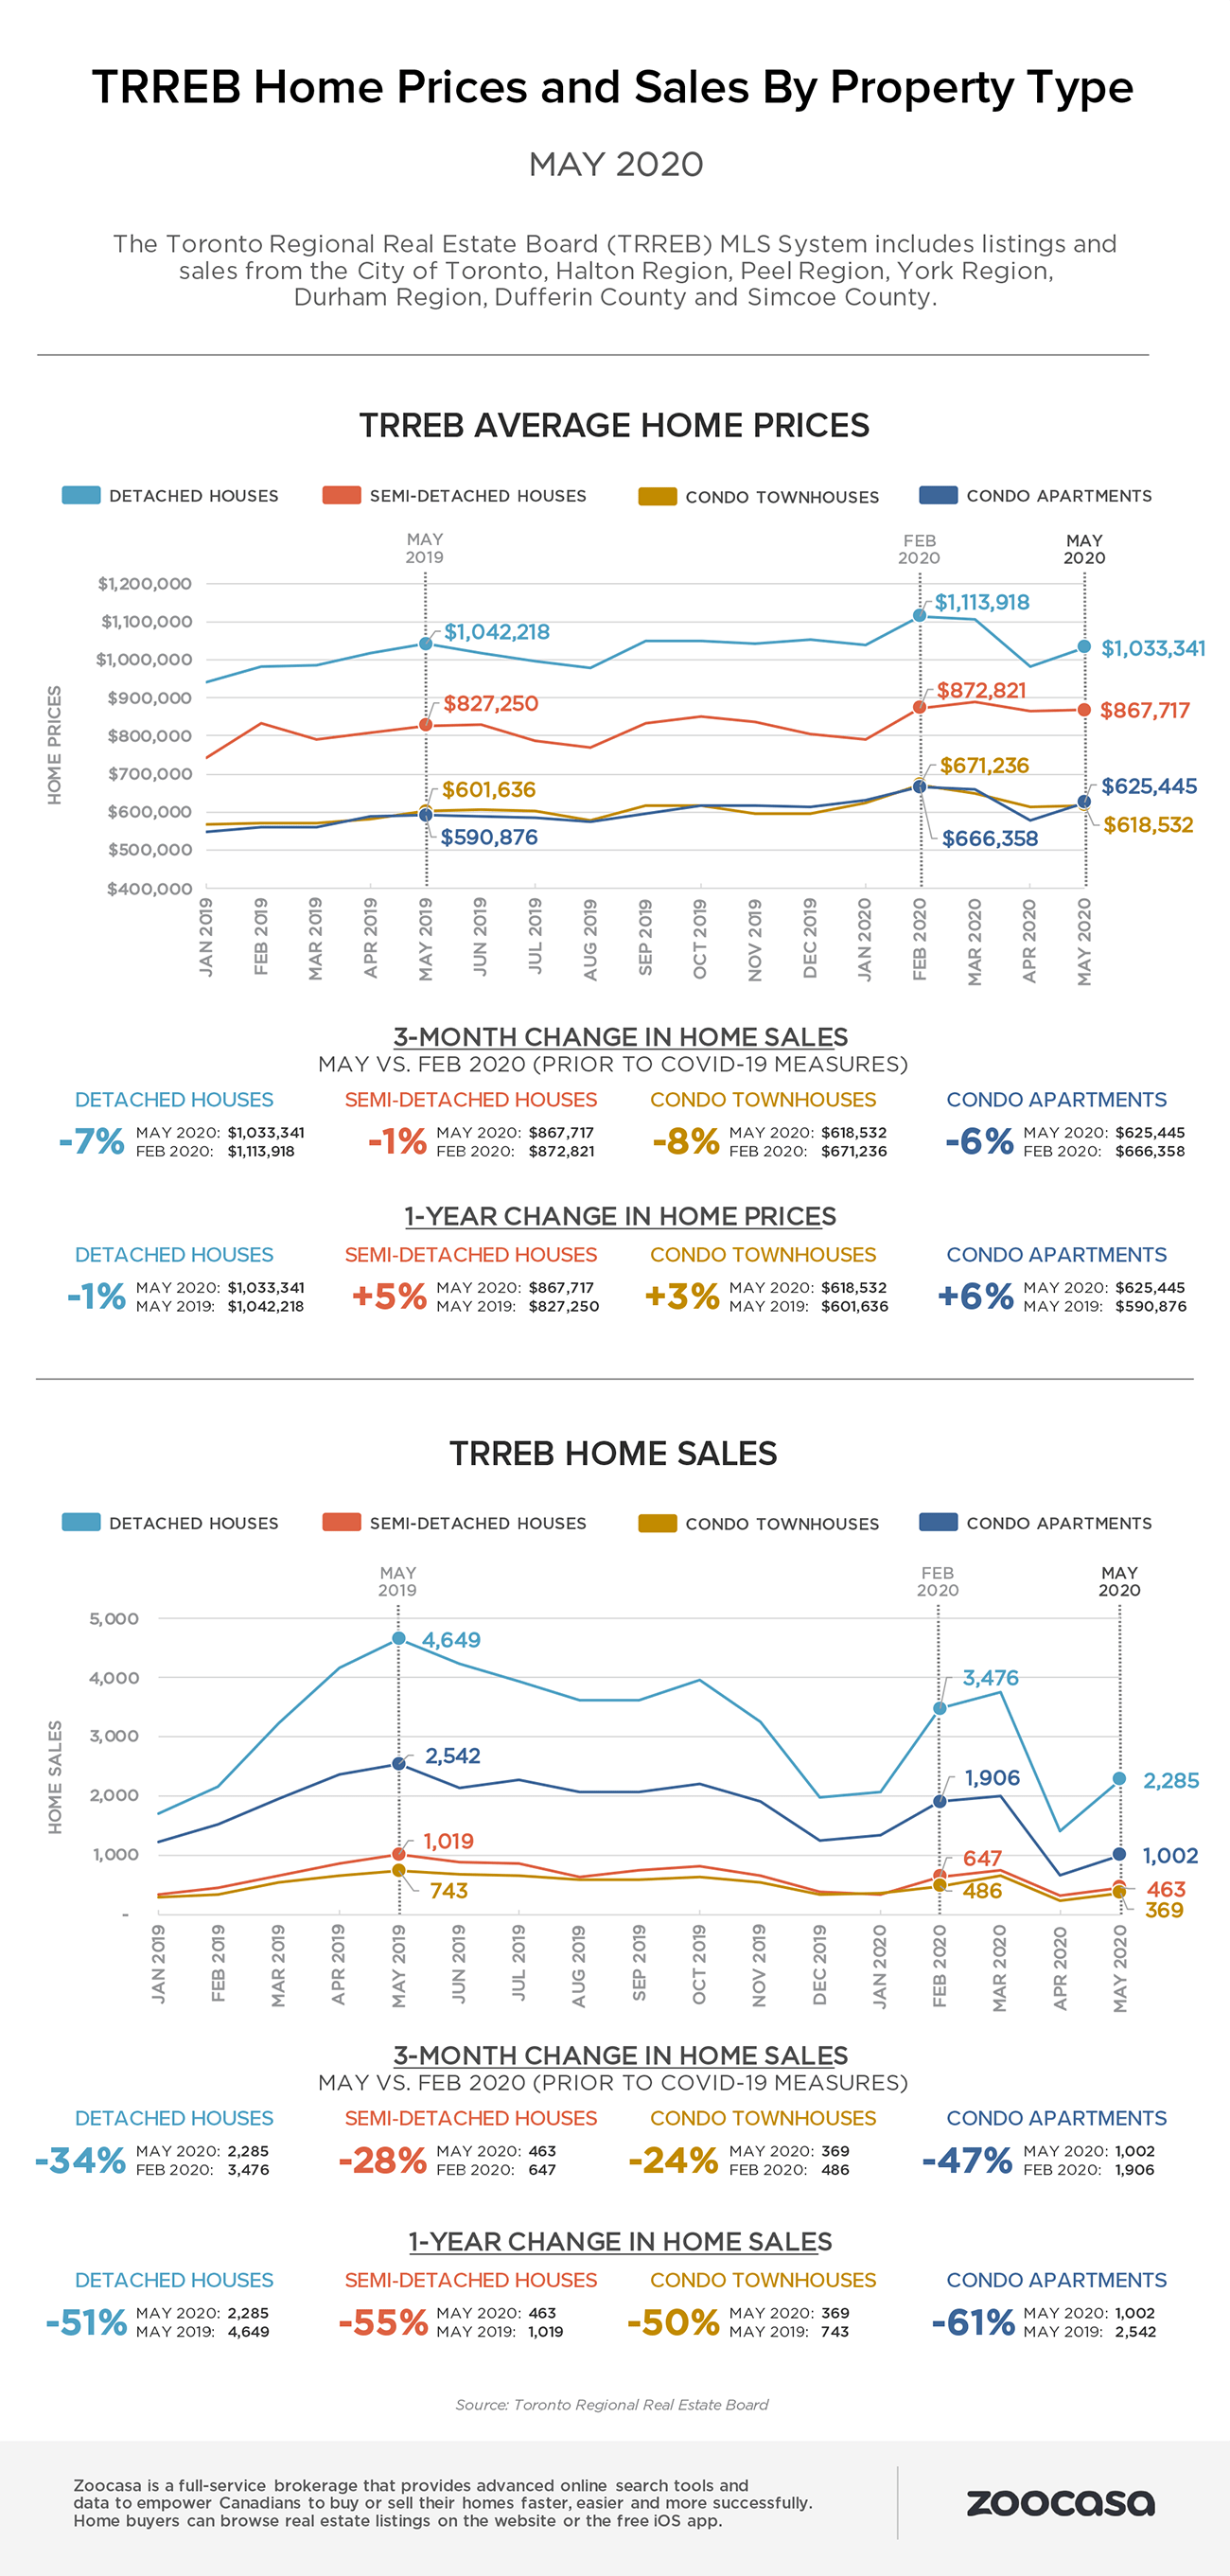 Toronto region home sales and prices by property type, May 2020